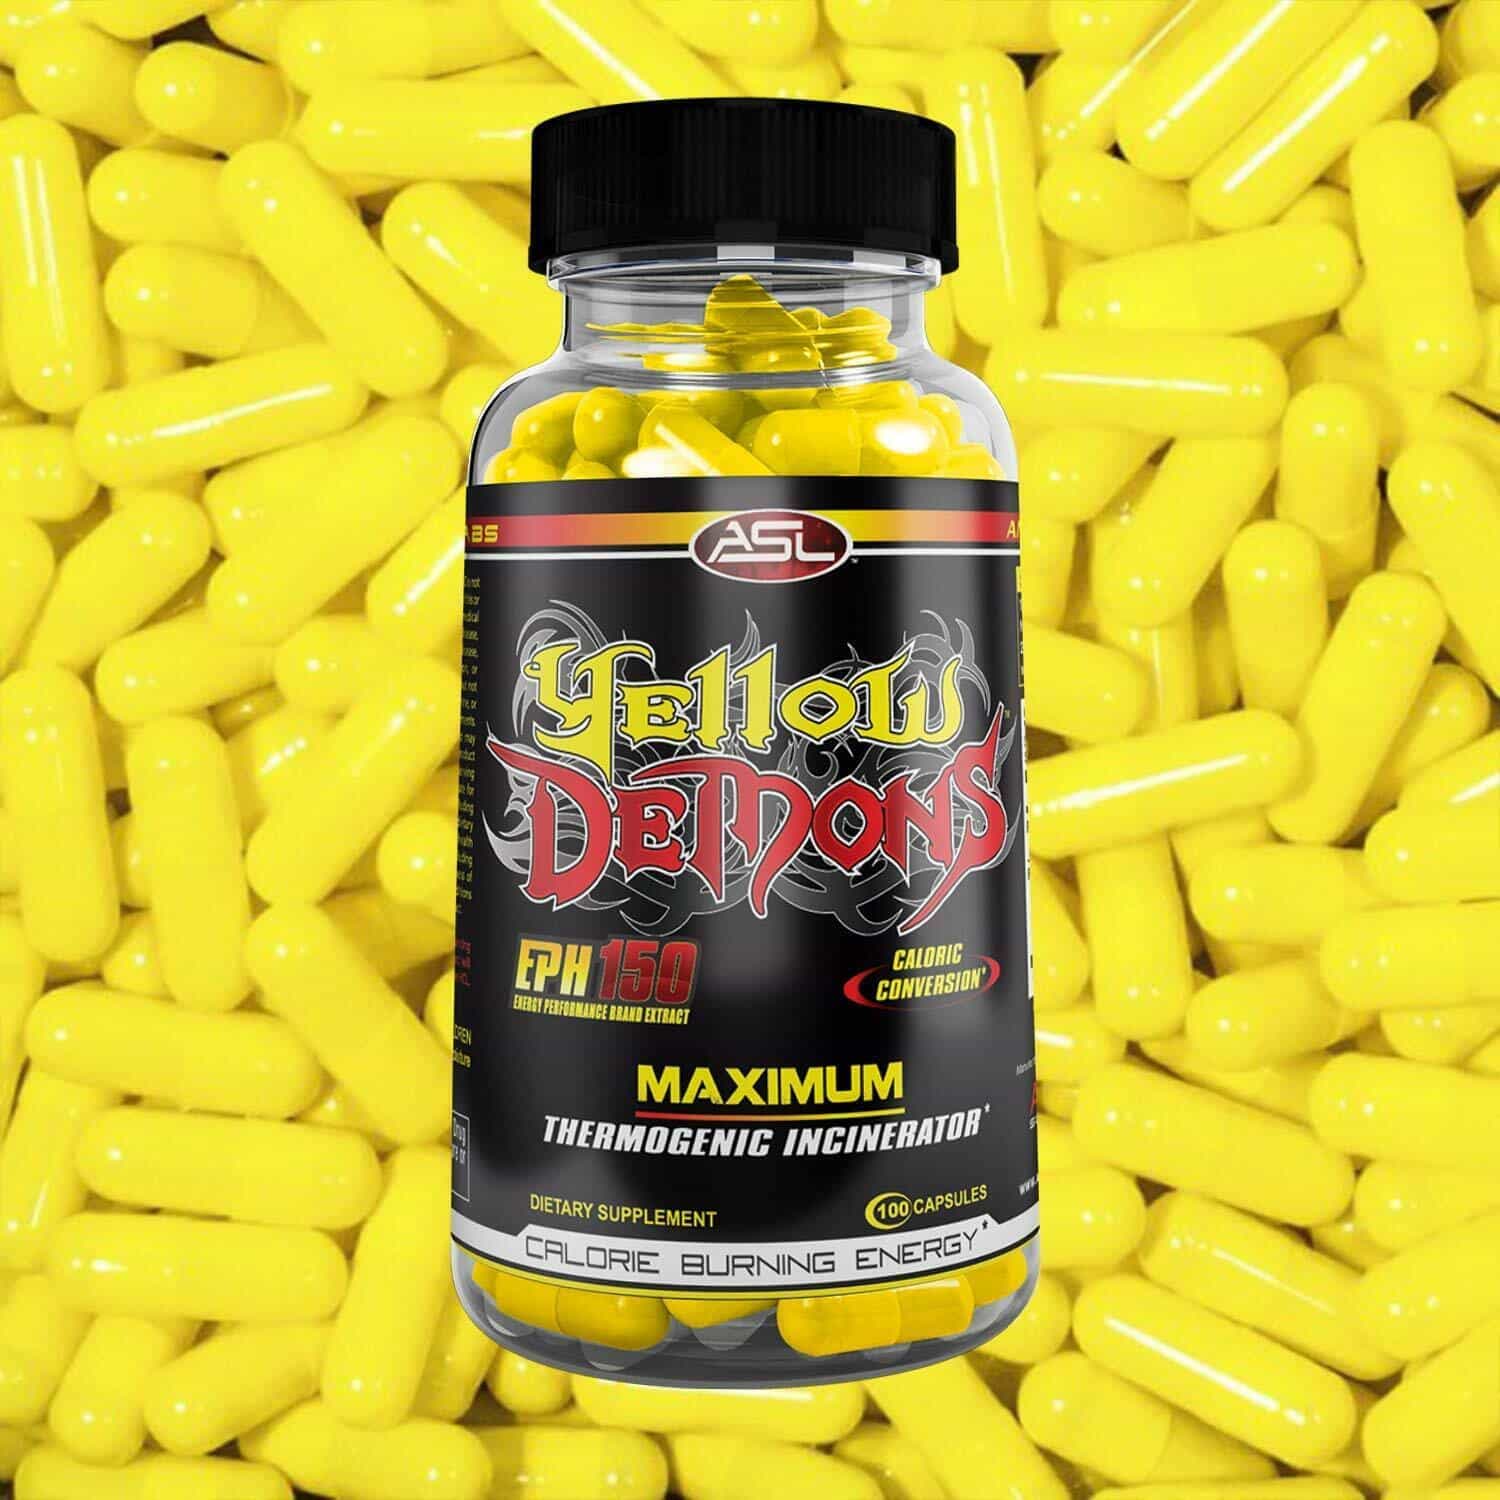 ASL Yellow Demons Maximum Thermogenic Fat burner 100ct Weight Loss Healthy Diet